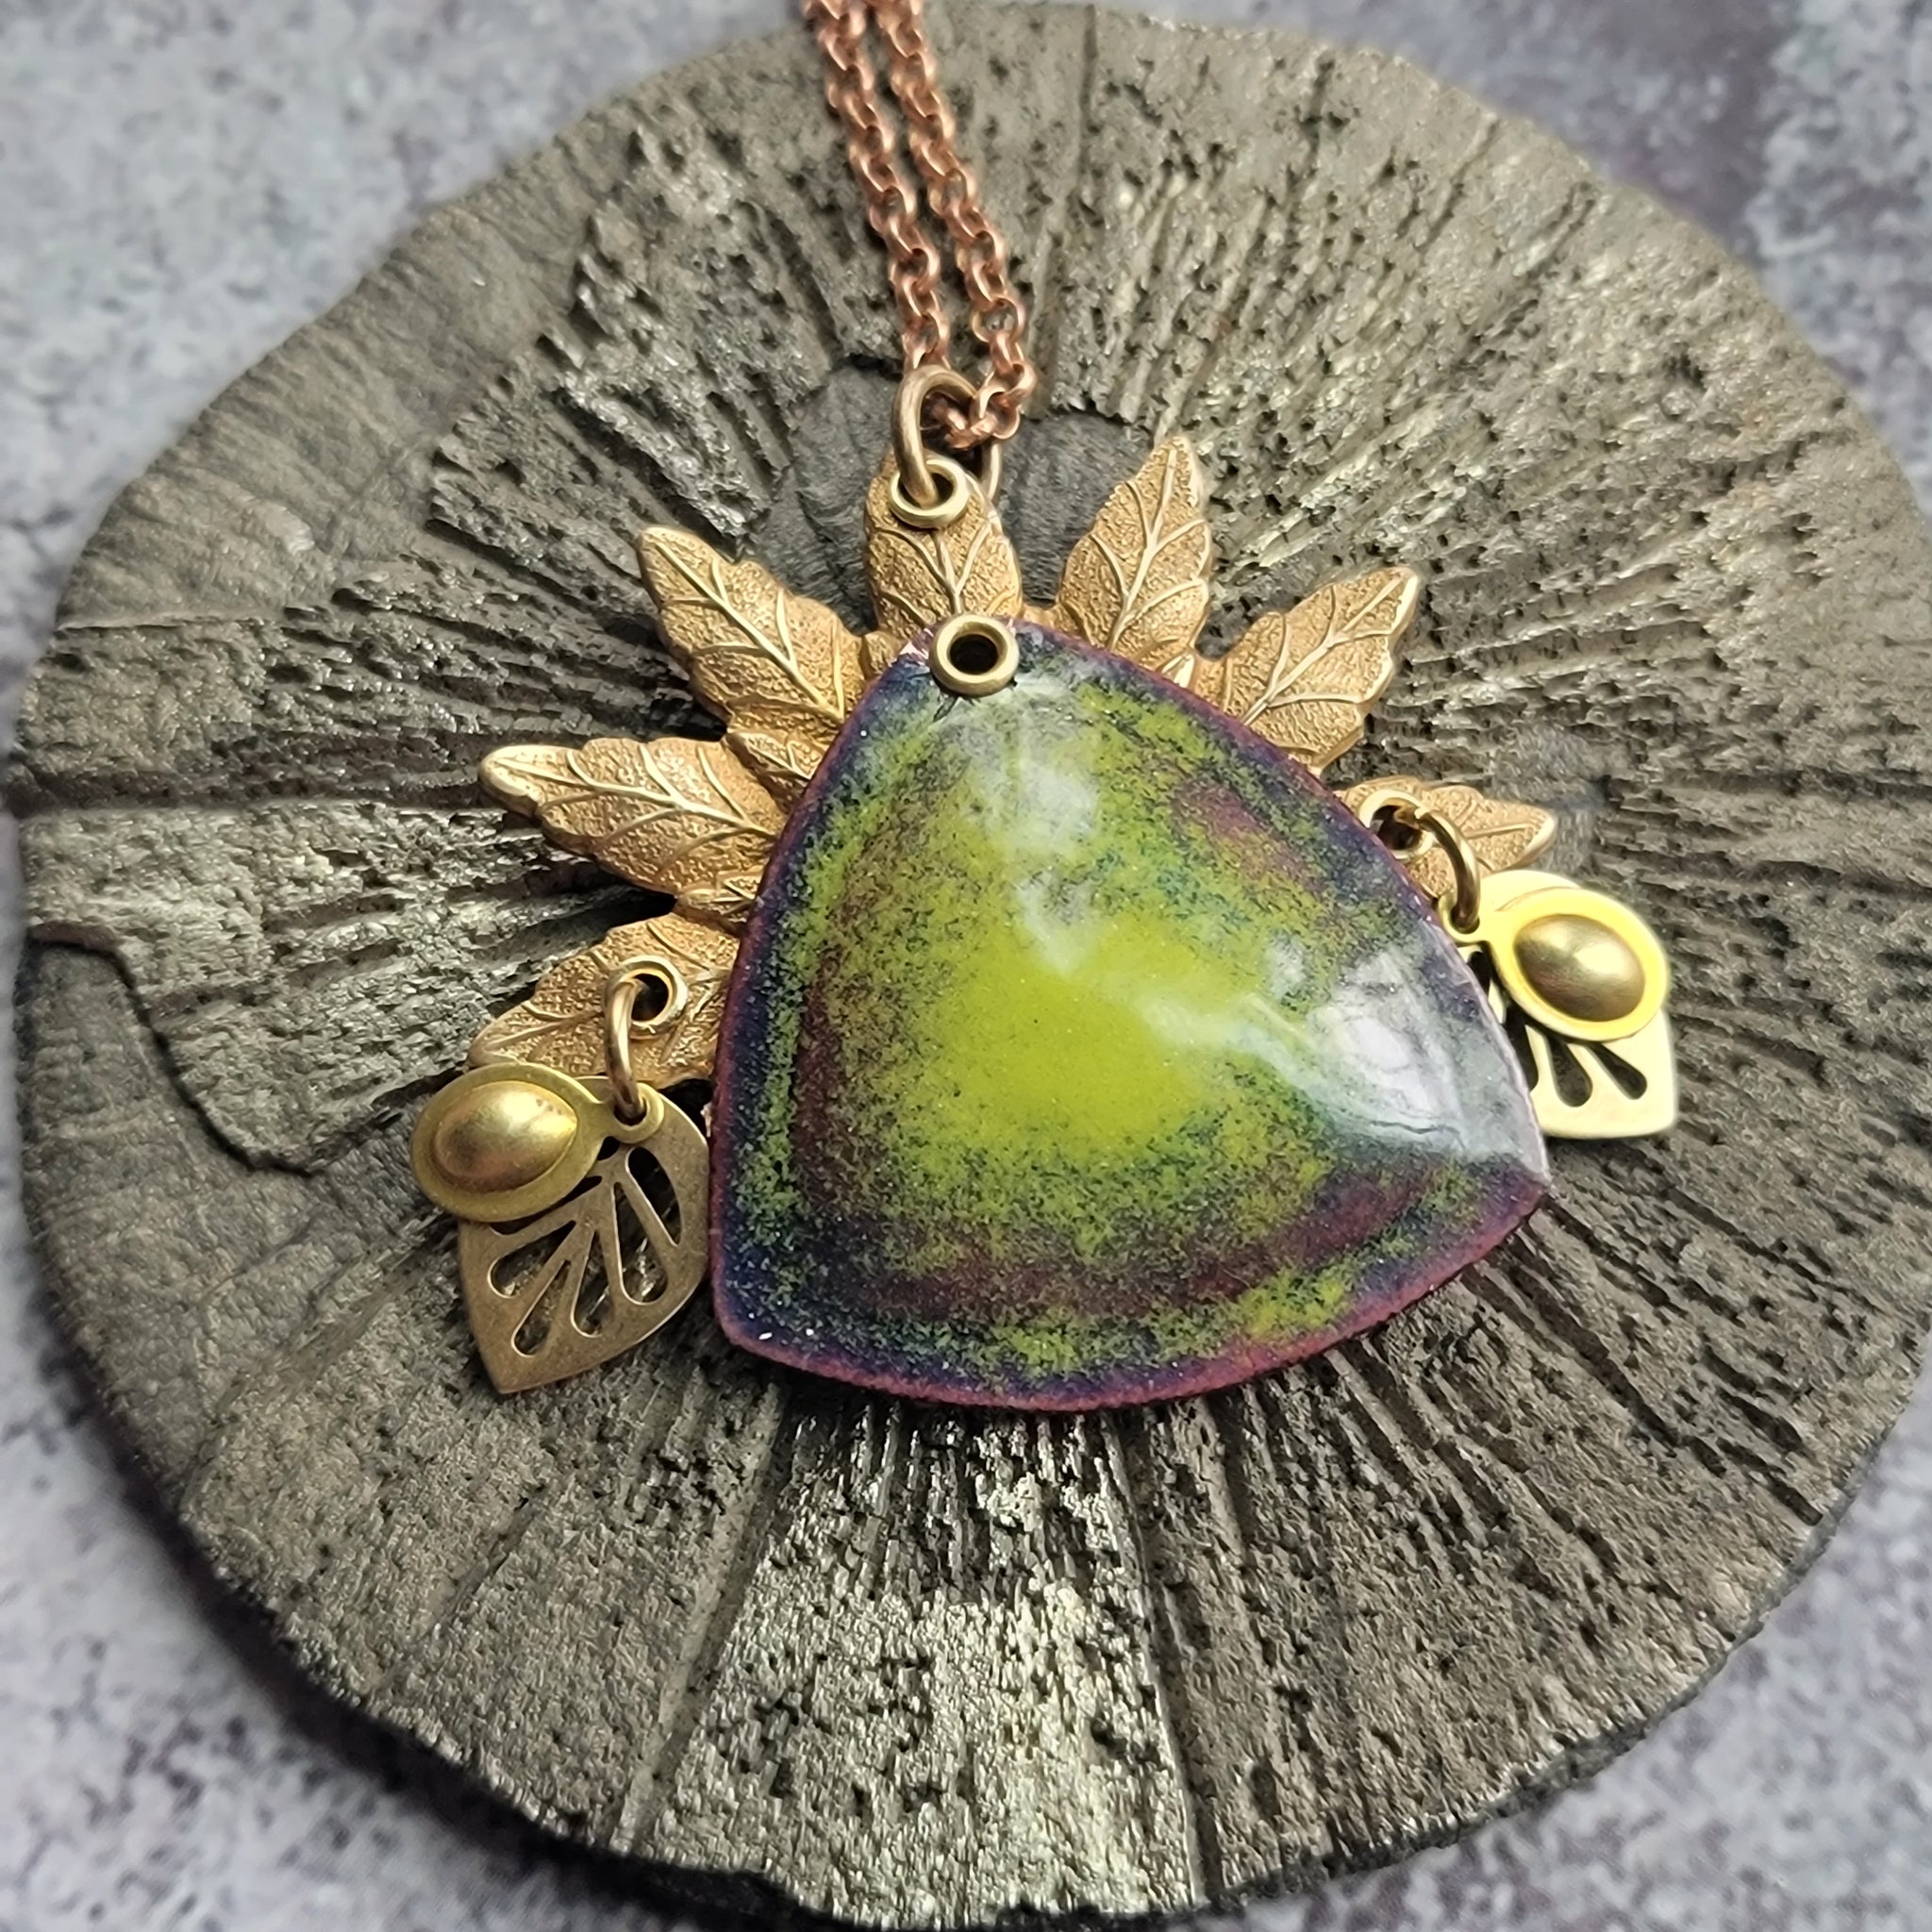 Enameled Copper Collection - Summer Edition